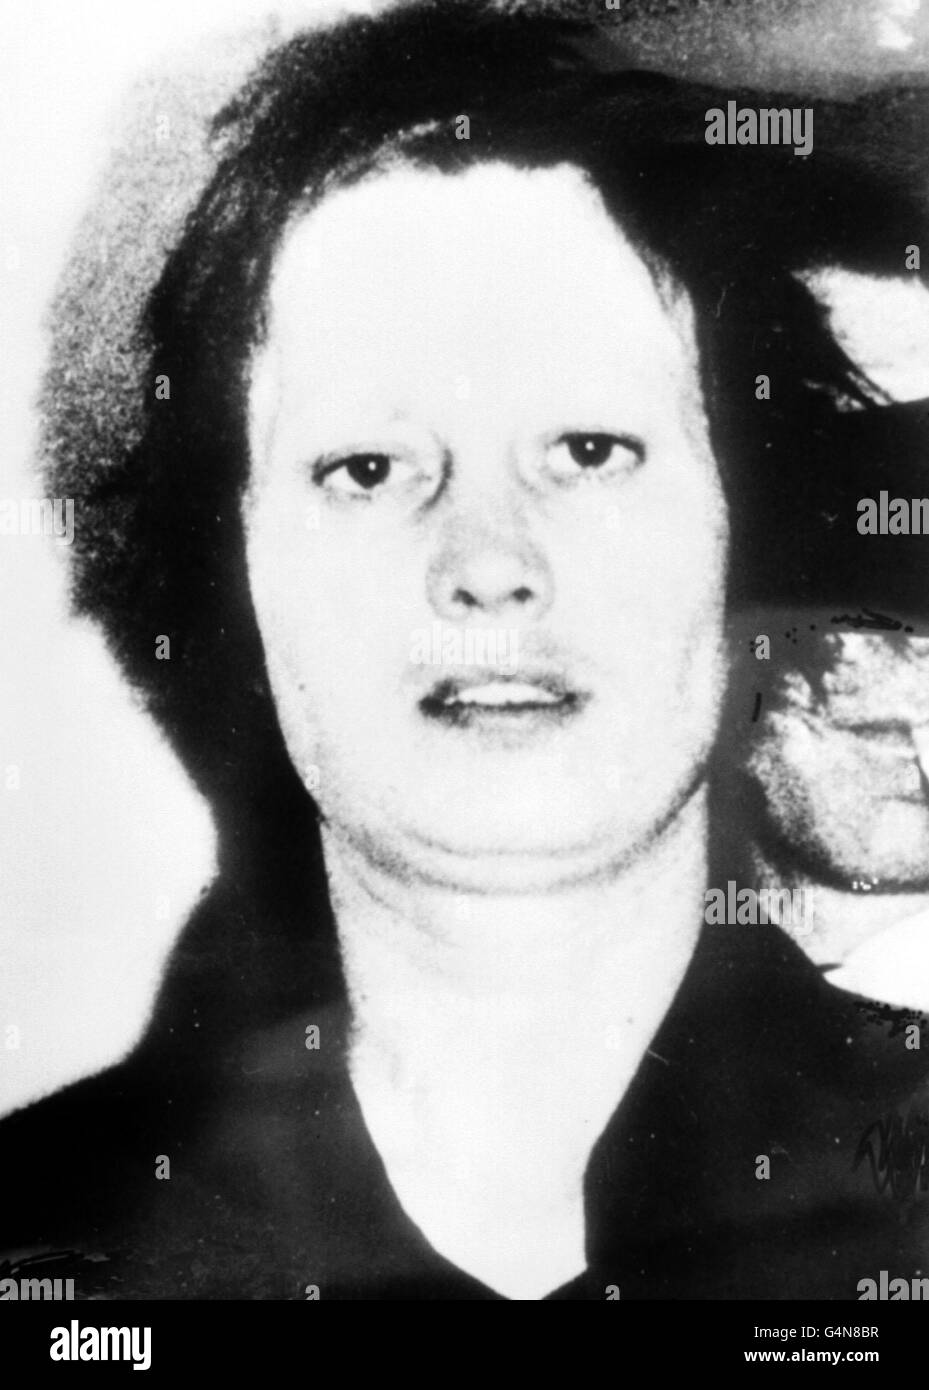 Ulrike Meinhof, one of the leaders of the gang that terrorised Germany for ten years, and committed suicide by hanging herself. With Andreas Baader she was responsible for forming the Red Army Faction. 18/10/77: Baader commits suicide. * Baader followed her example by commiting suicide in his prison cell. Stock Photo